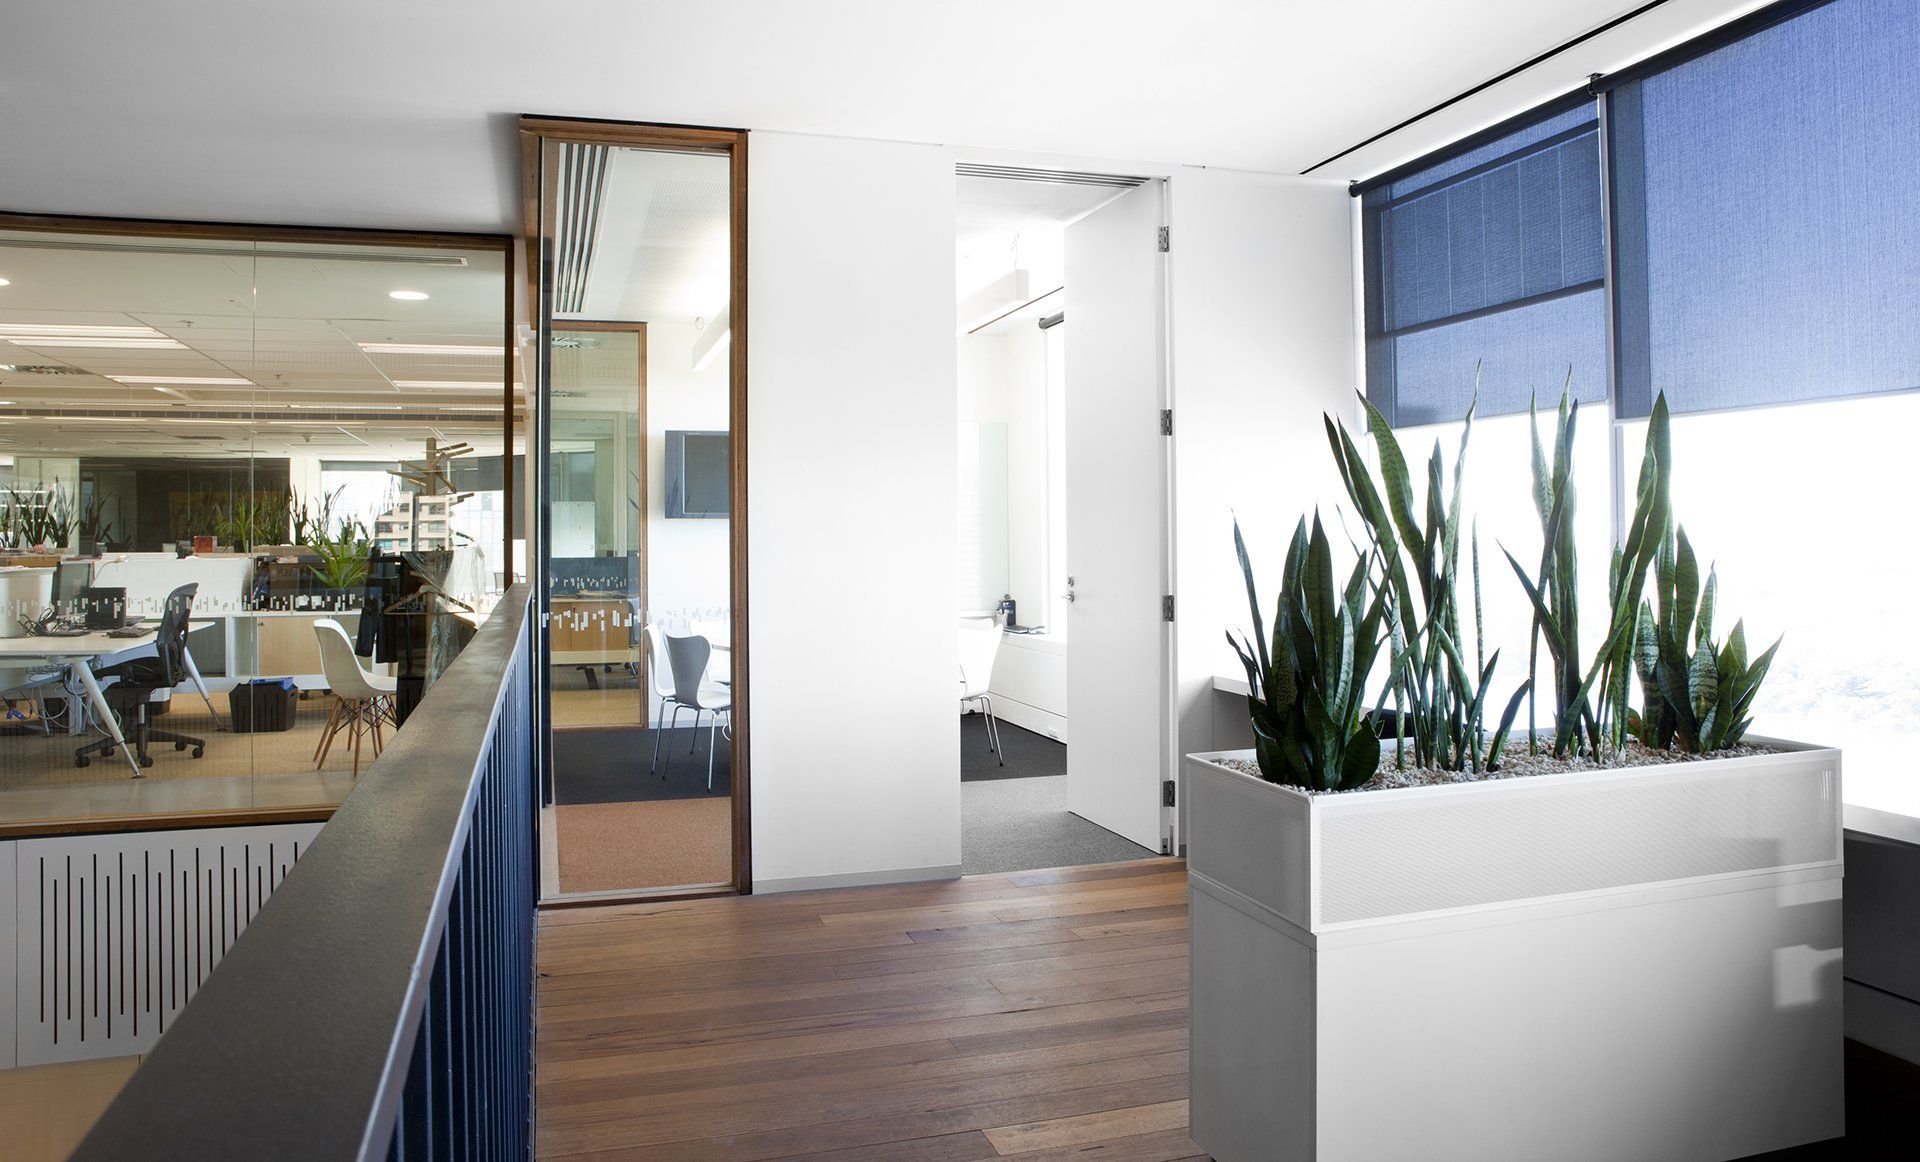 Modern, sophisticated & brightly lit office space in a eco-friendly office building